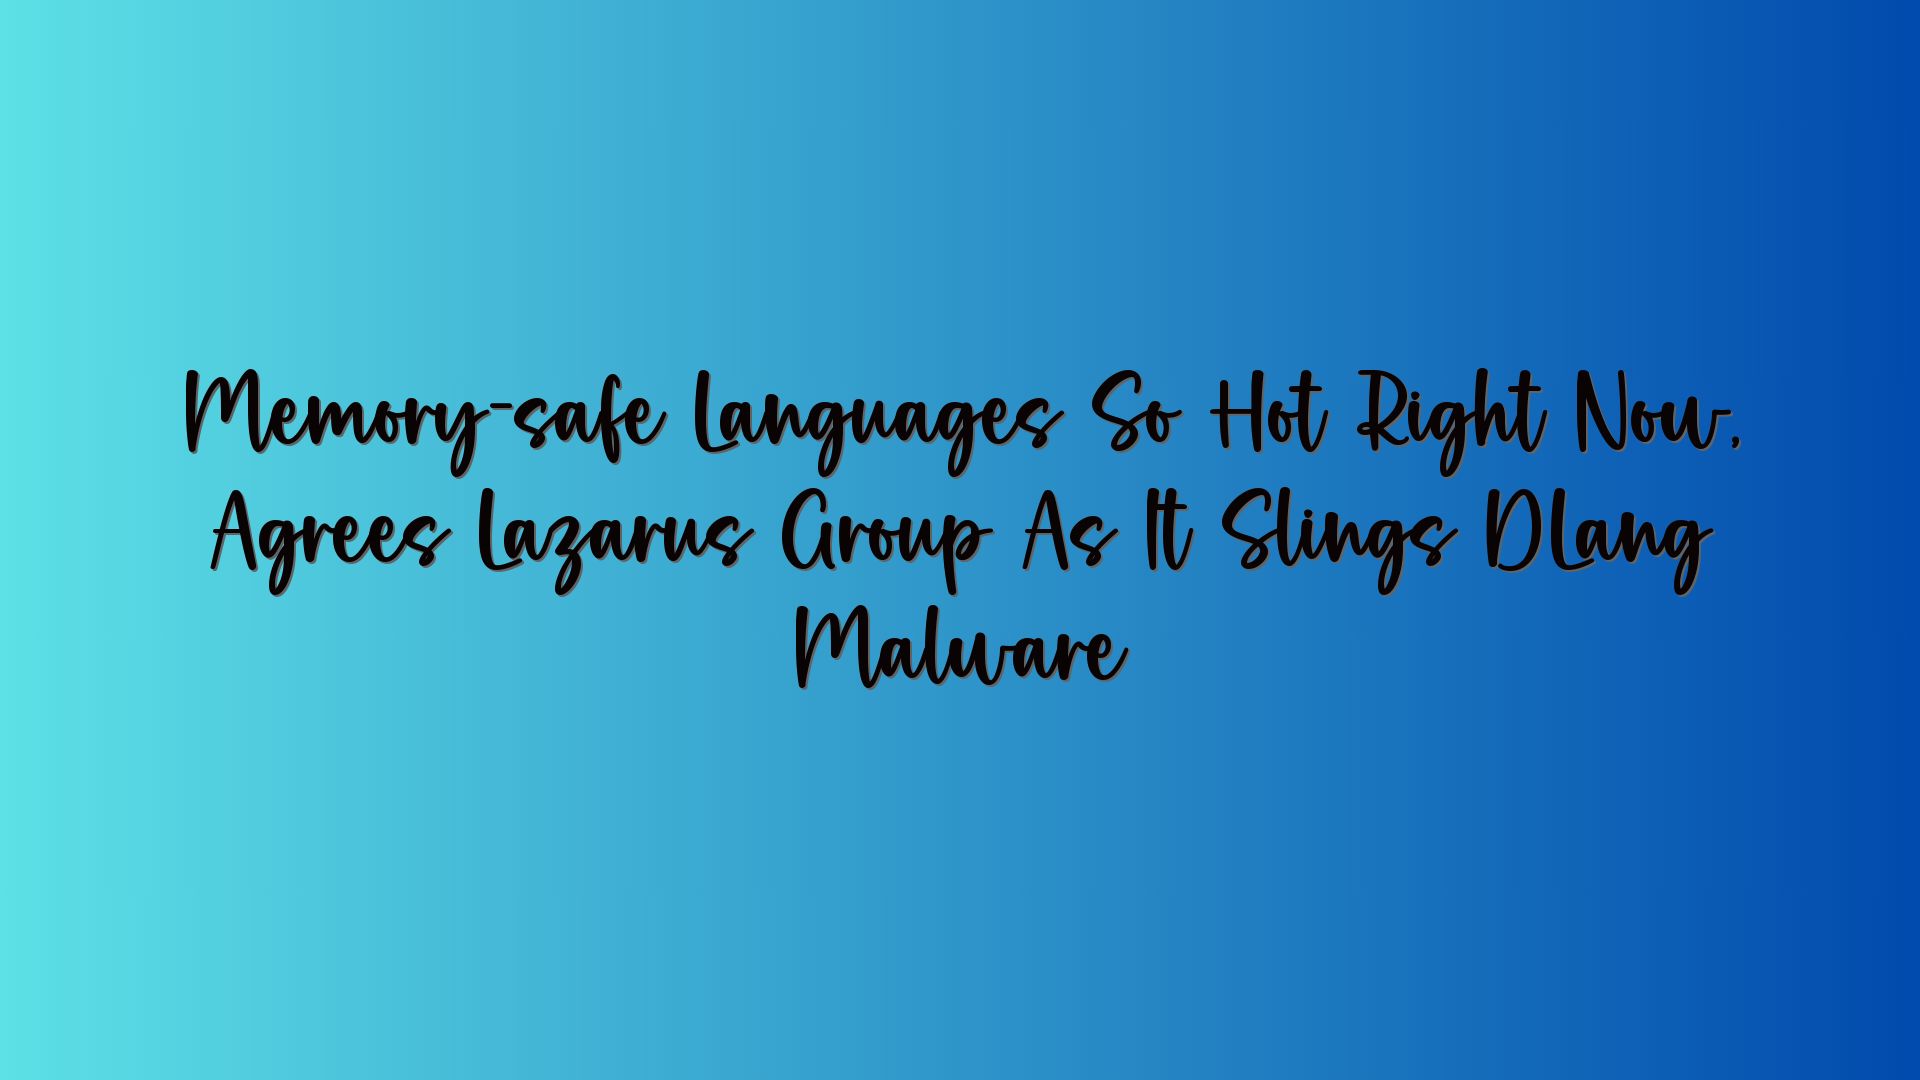 Memory-safe Languages So Hot Right Now, Agrees Lazarus Group As It Slings DLang Malware